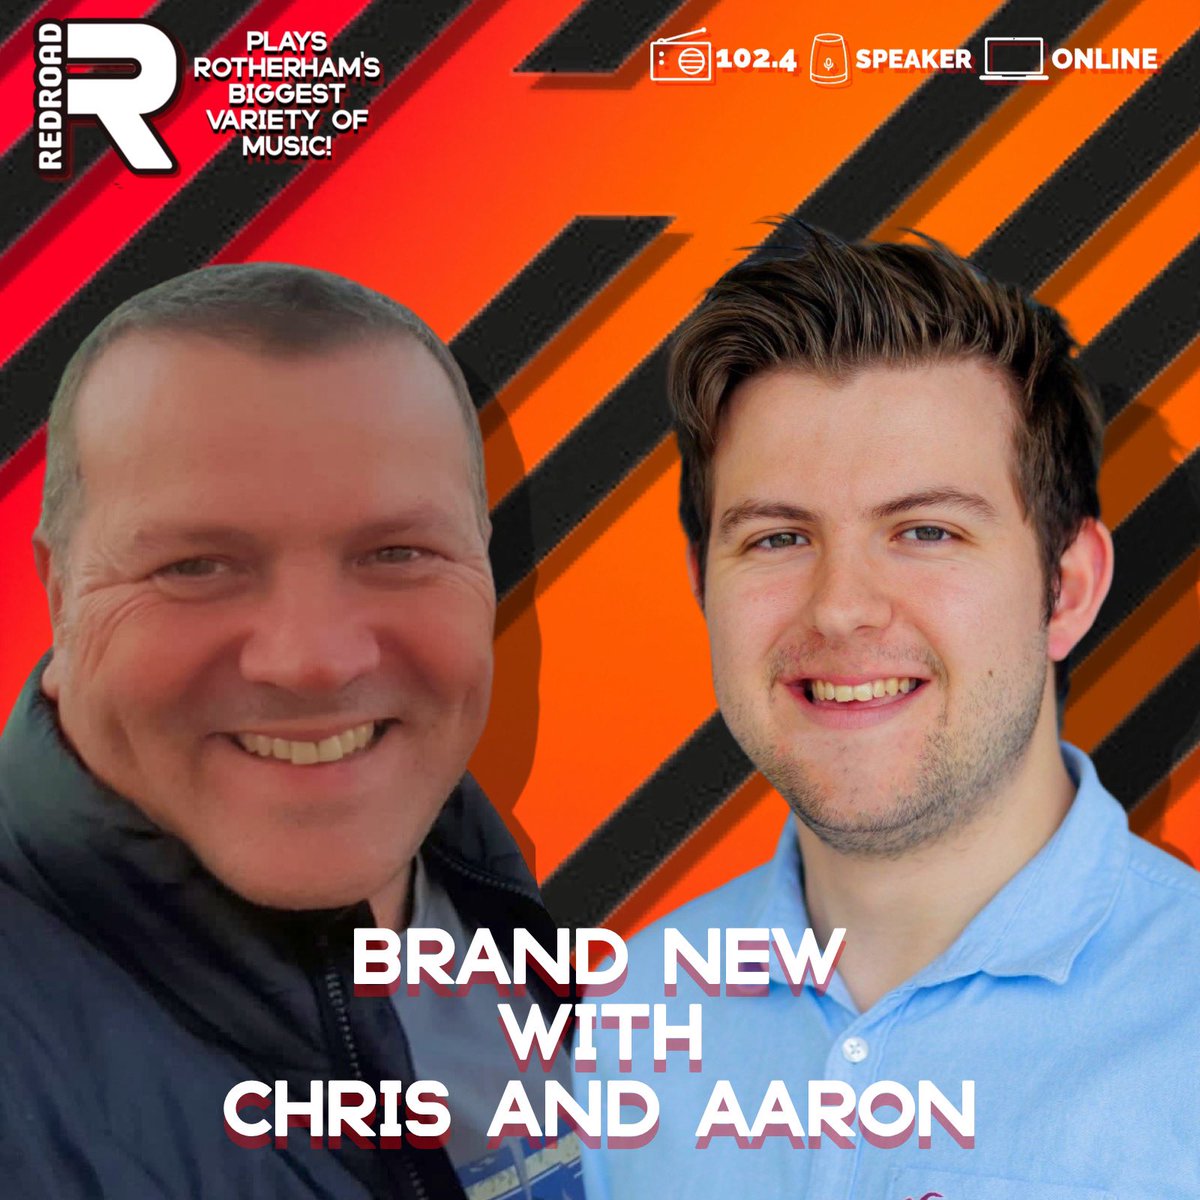 Aaron & Chris are back with Brand New on @RedroadFM from 10 this morning 1️⃣ Can @Beyonce make it another week on top of the Redroad chart with Texas Hold Em? 🎶 Plus in the new music hour, new tracks from @taylorswift13 & @PostMalone, @AlfieTempleman, Lay Bankz & @ChappellRoan